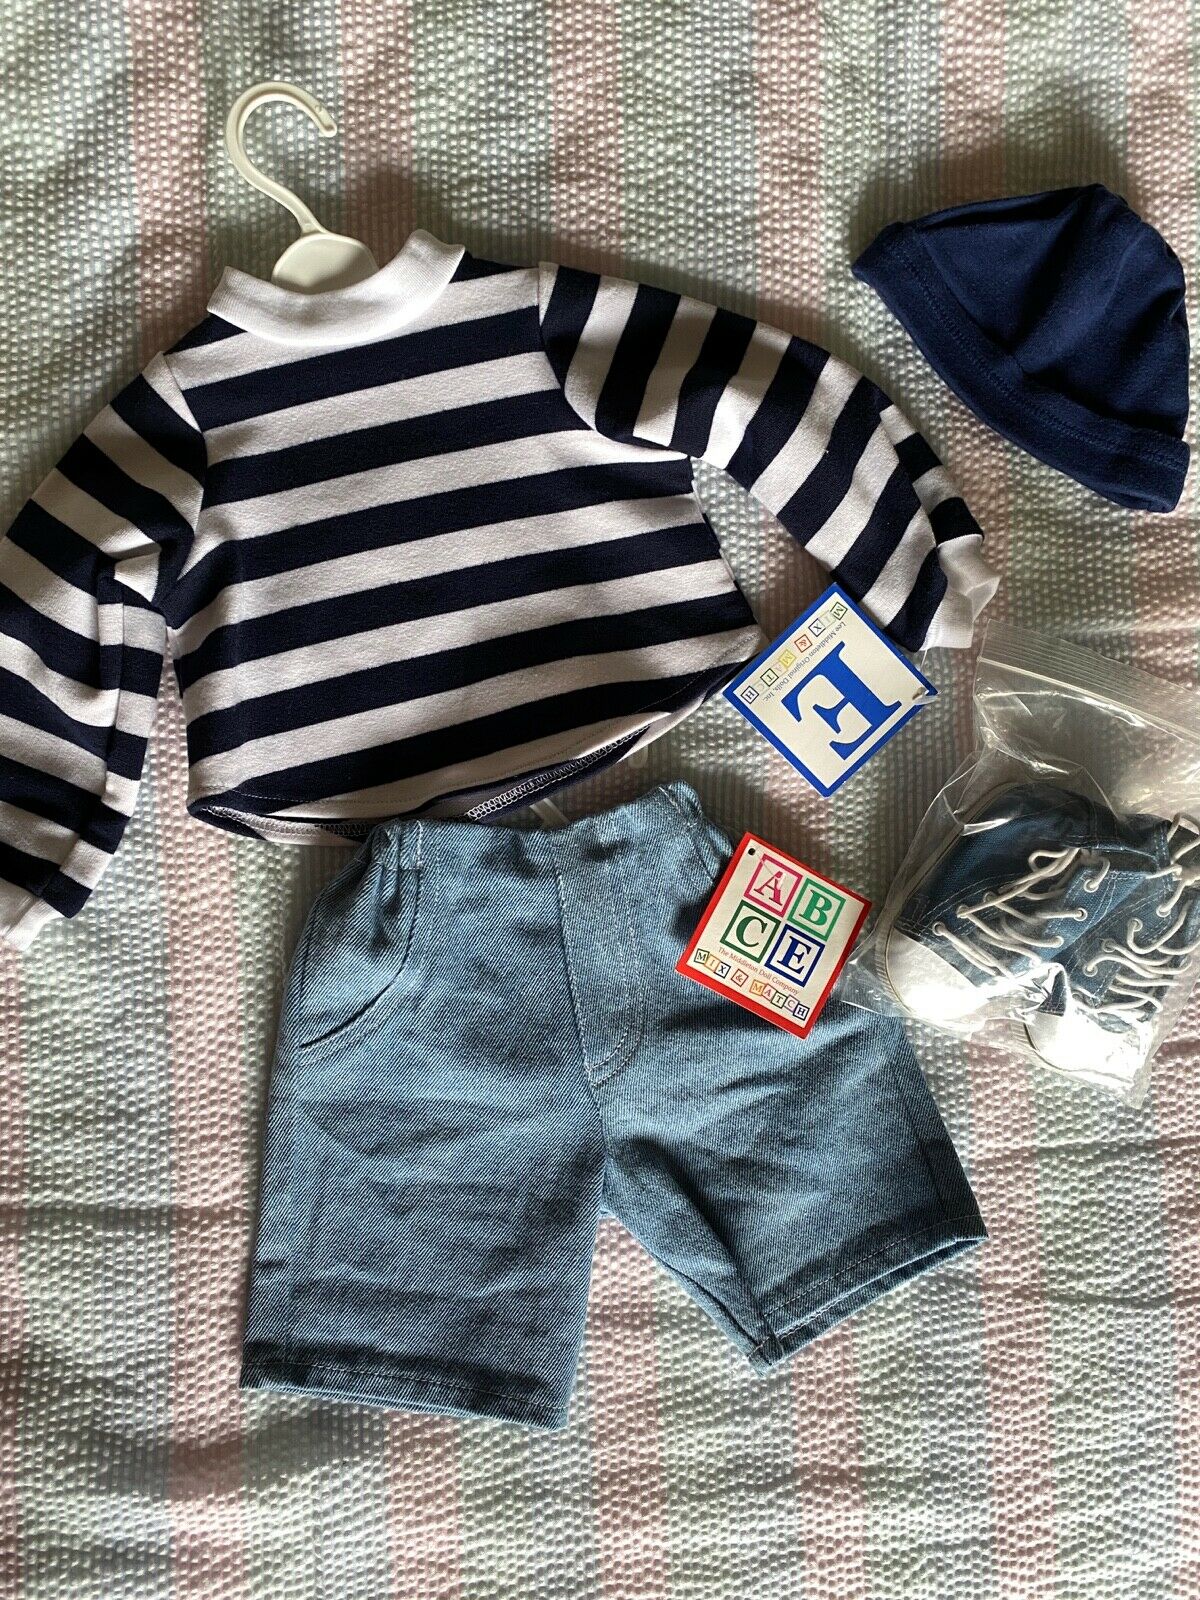 Nwt Lee Middleton Doll Clothes Outfit Blue Stripe Shirt Denims Sneakers & Cap